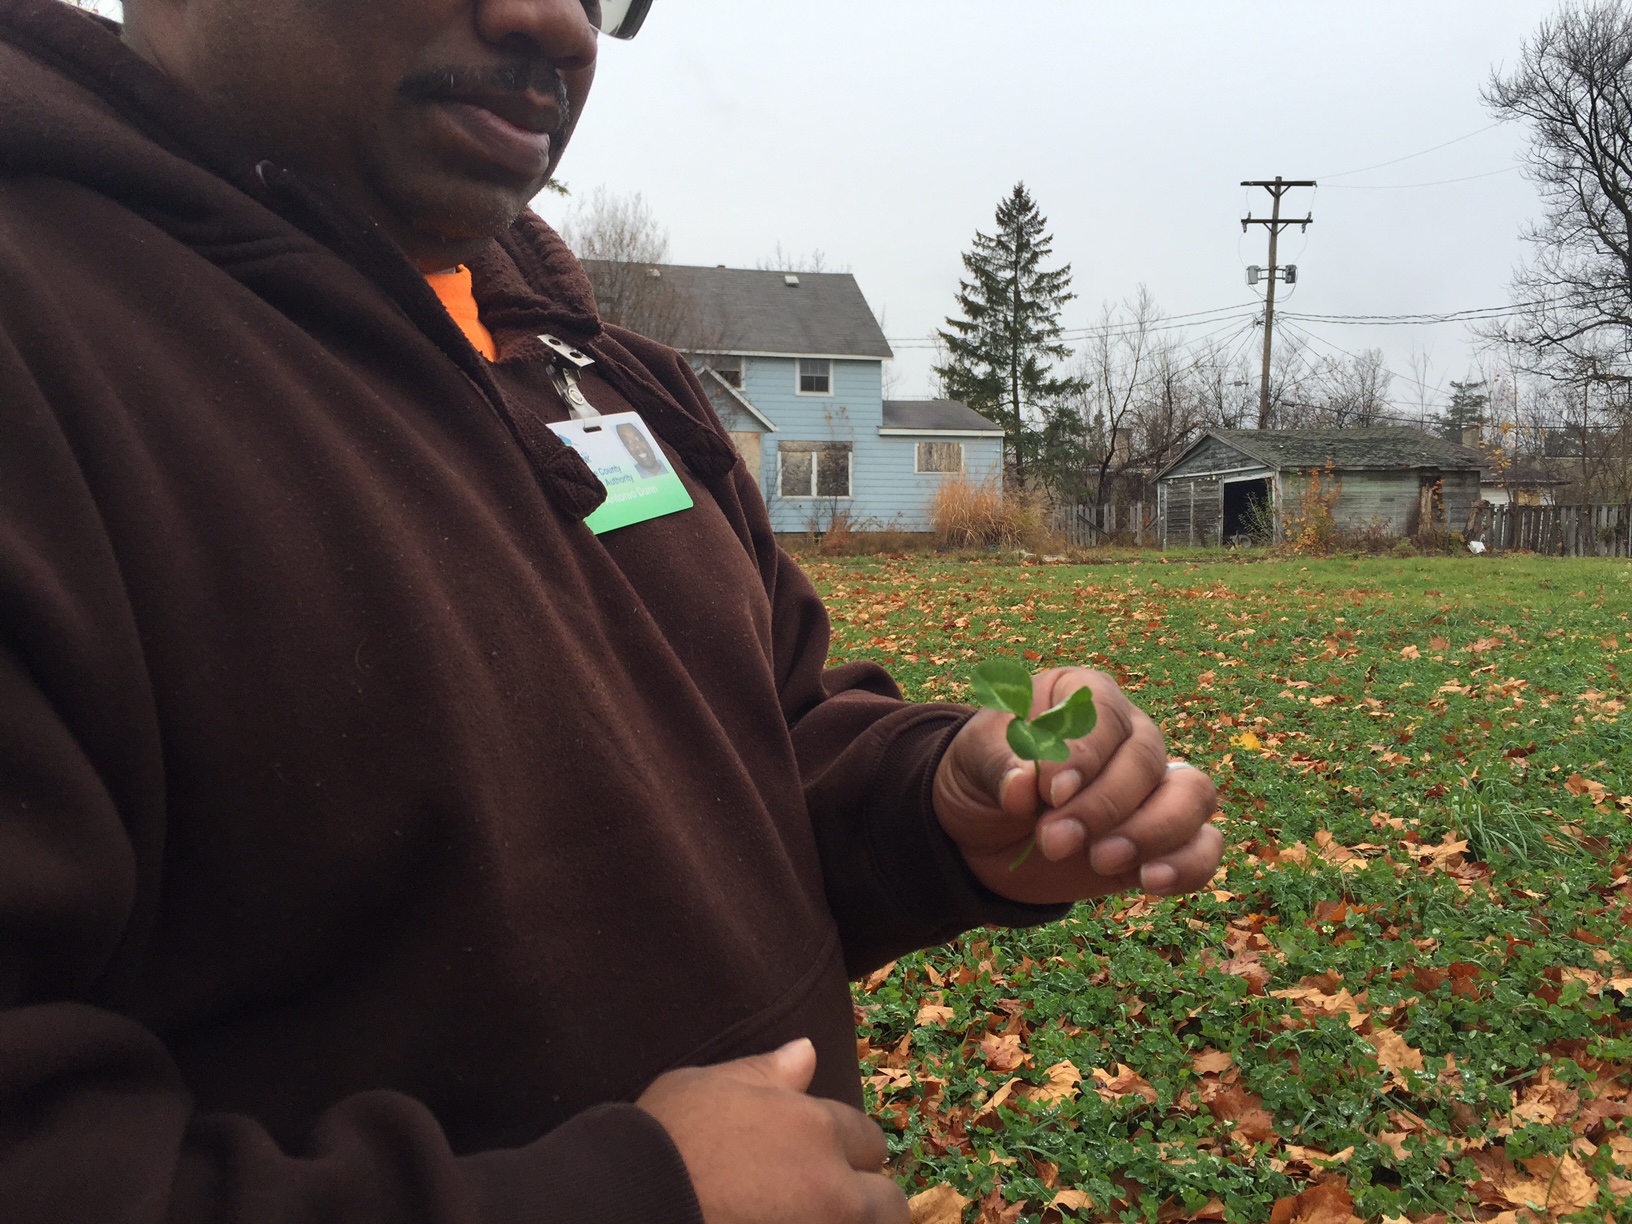 Antonio Dunn, an inspector with the Genesee County Land Bank Authority, holds a Dutch white clover. As part of the blight elimination program in Flint ‒ which is run by the Genesee County Land Bank Authority ‒ Dutch white clovers are planted on demo sites instead of grass to reduce mowing costs and safety hazards posed by tall grasses. (Bridge photo by Chastity Pratt Dawsey)